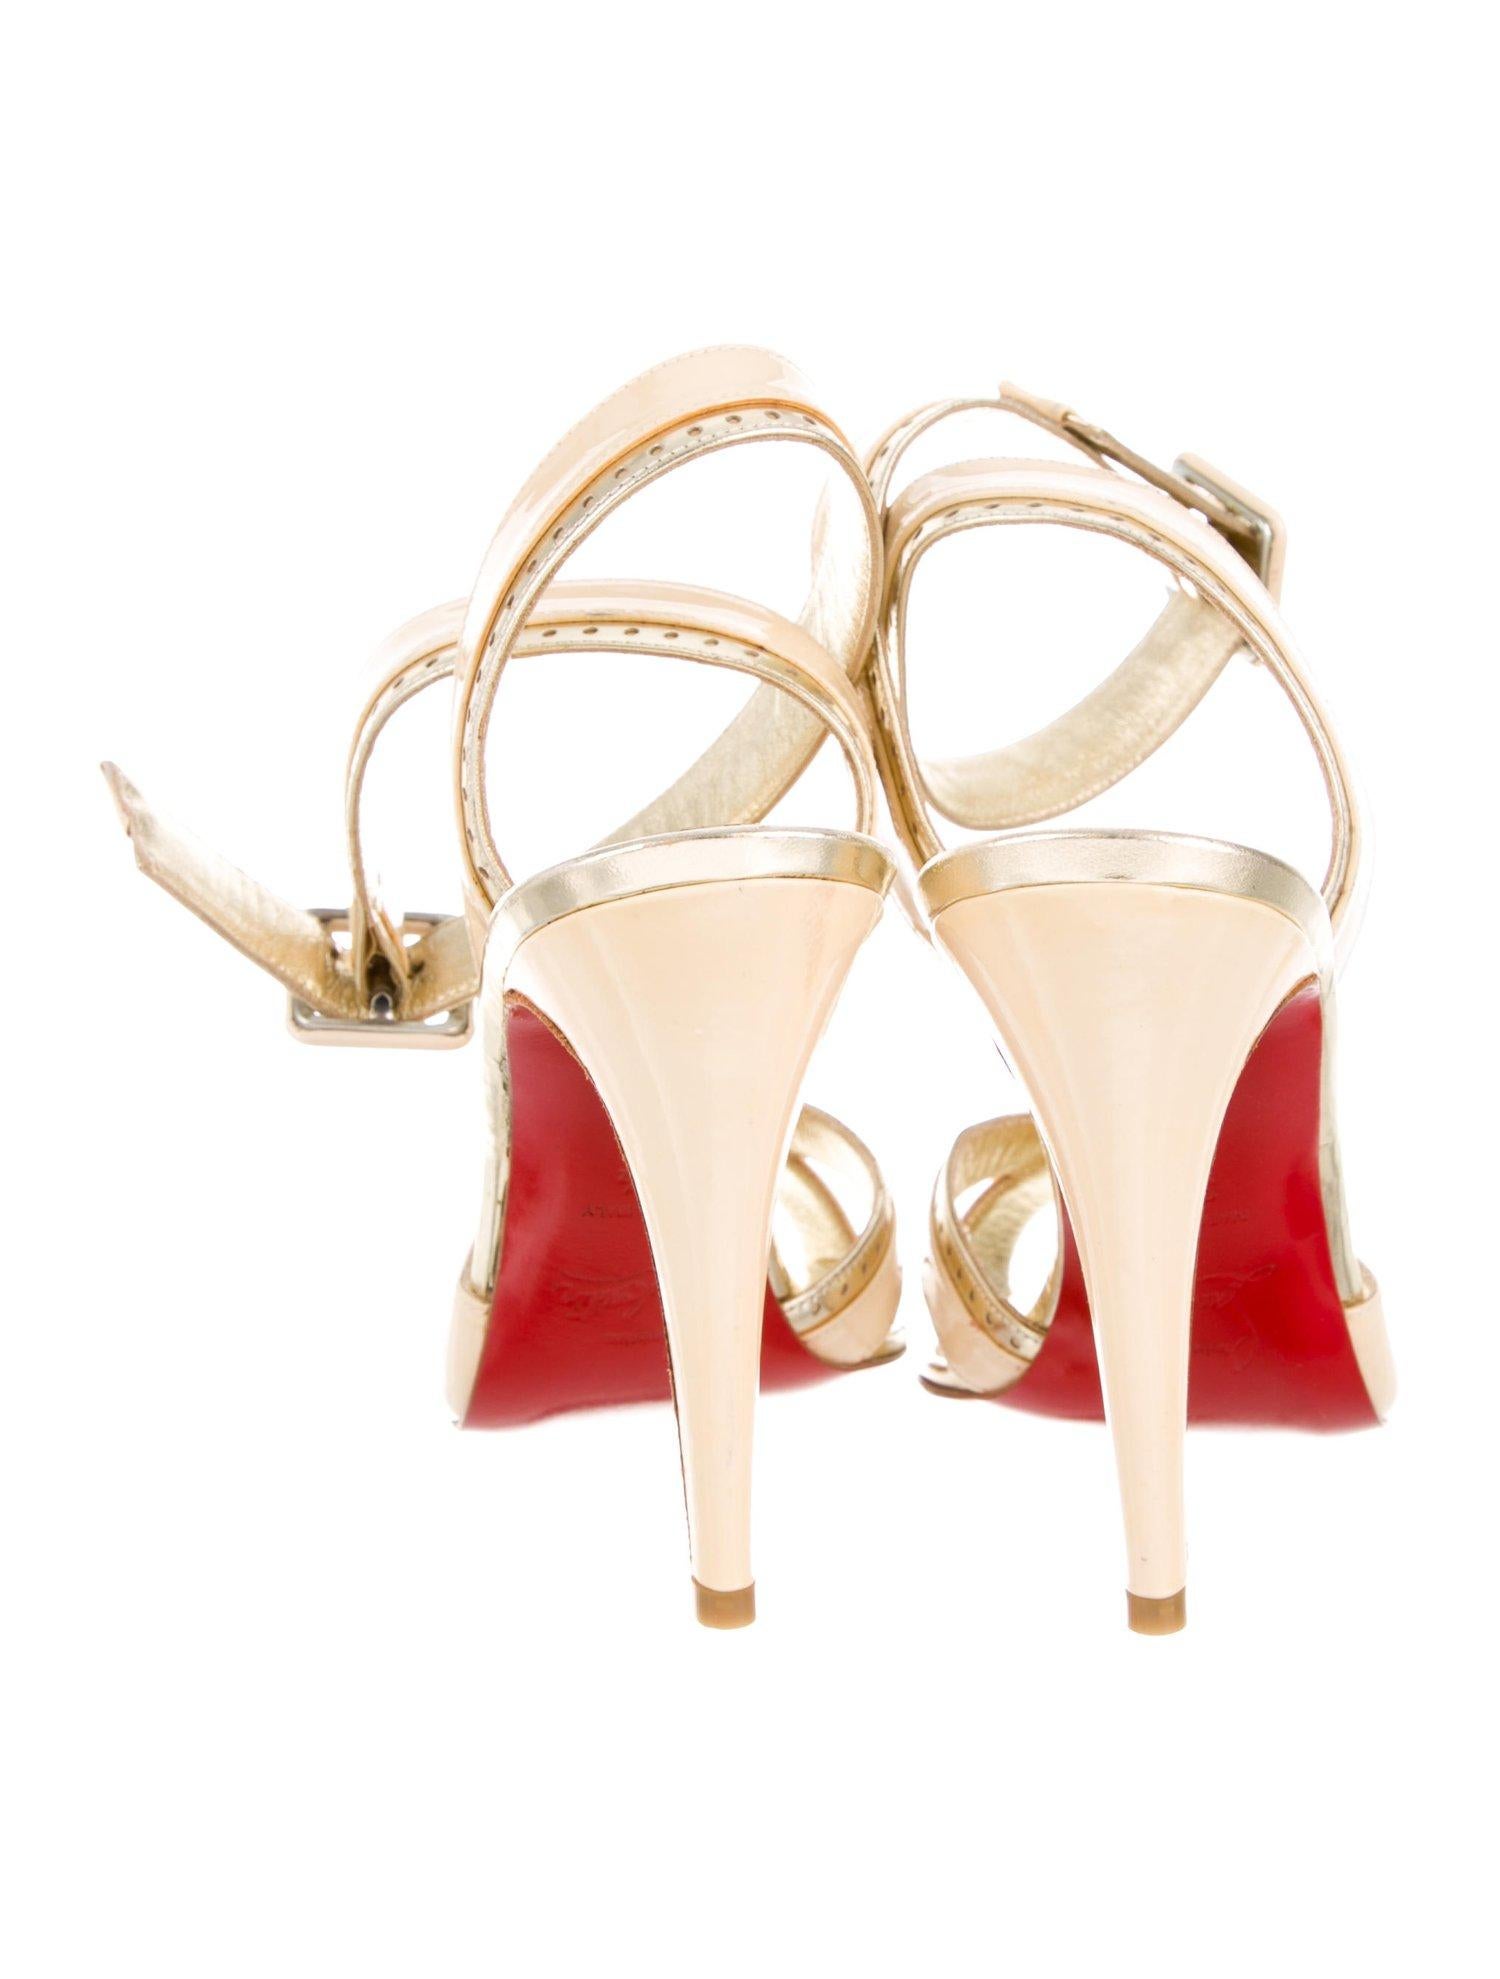 Women's Christian Louboutin NEW Nude Gold Patent Leather Evening Heels Sandals